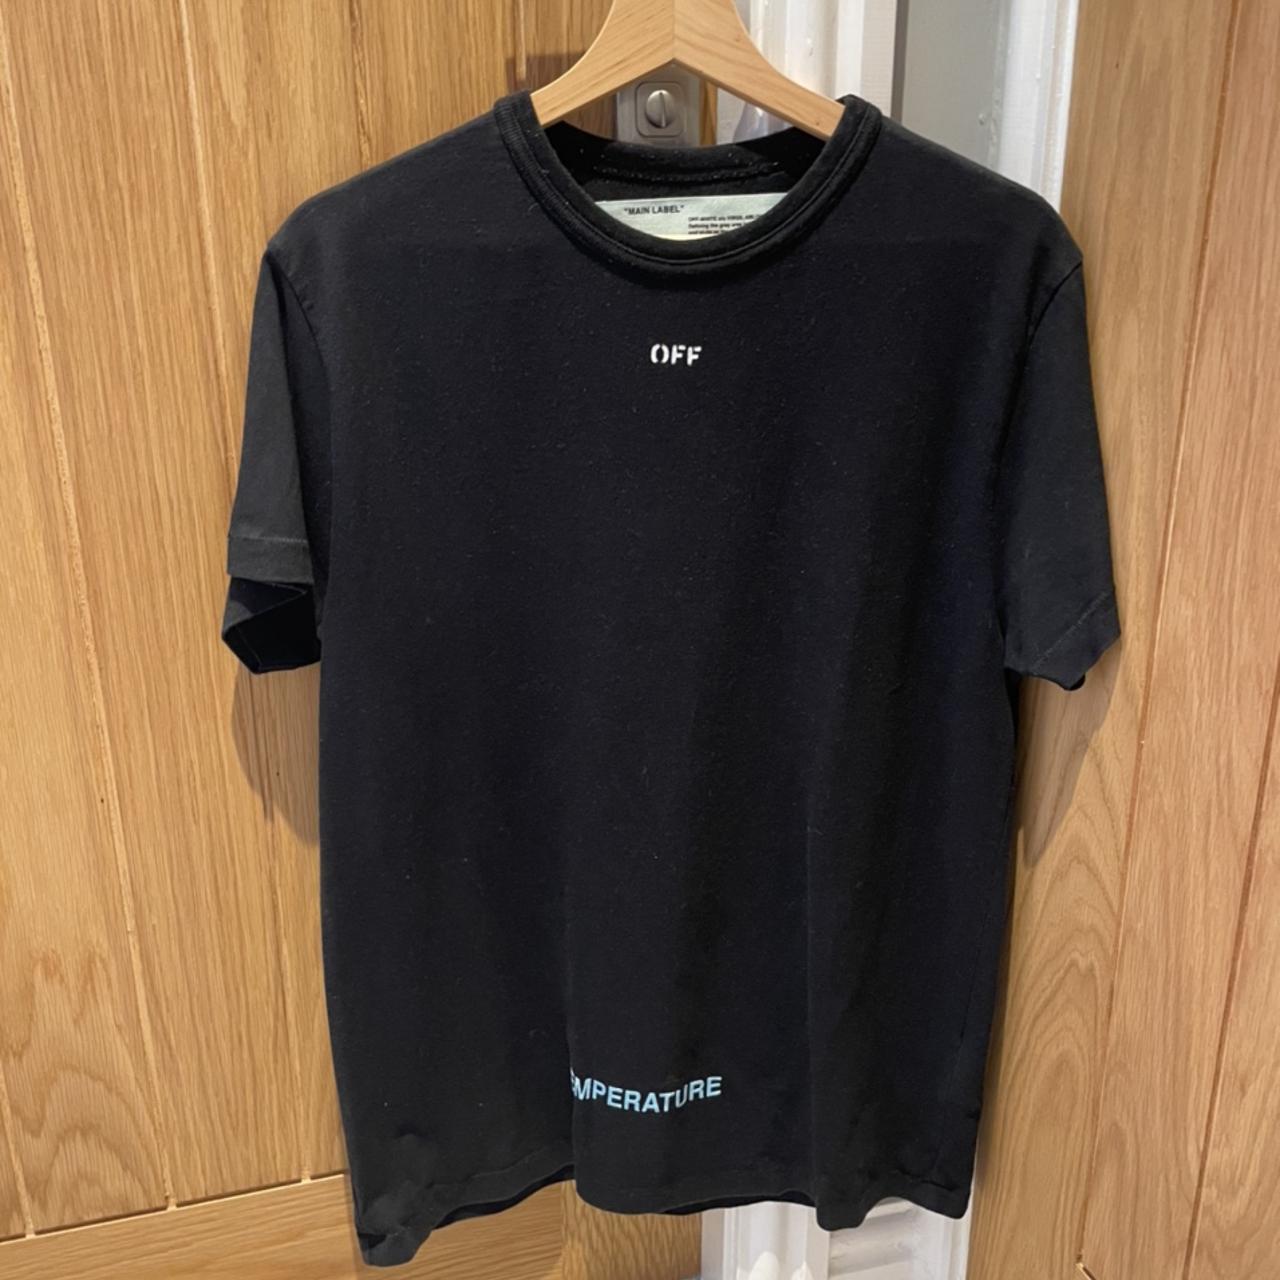 Off White Diagonal Temperature Tee Size XS fits up... - Depop